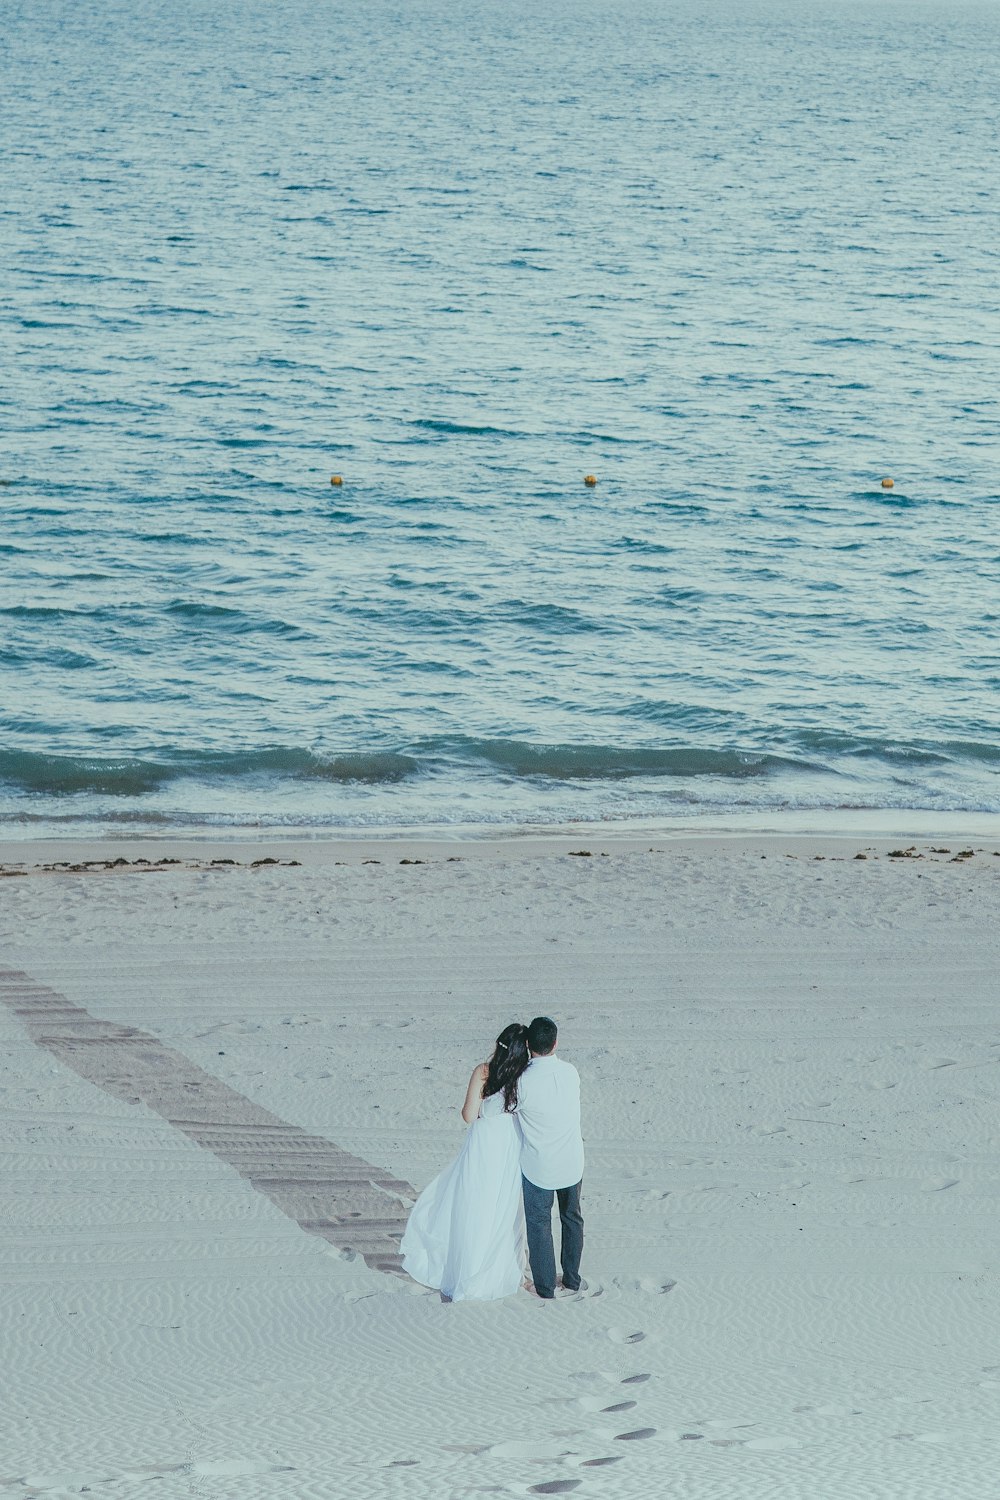 a man and a woman standing on a beach next to the ocean